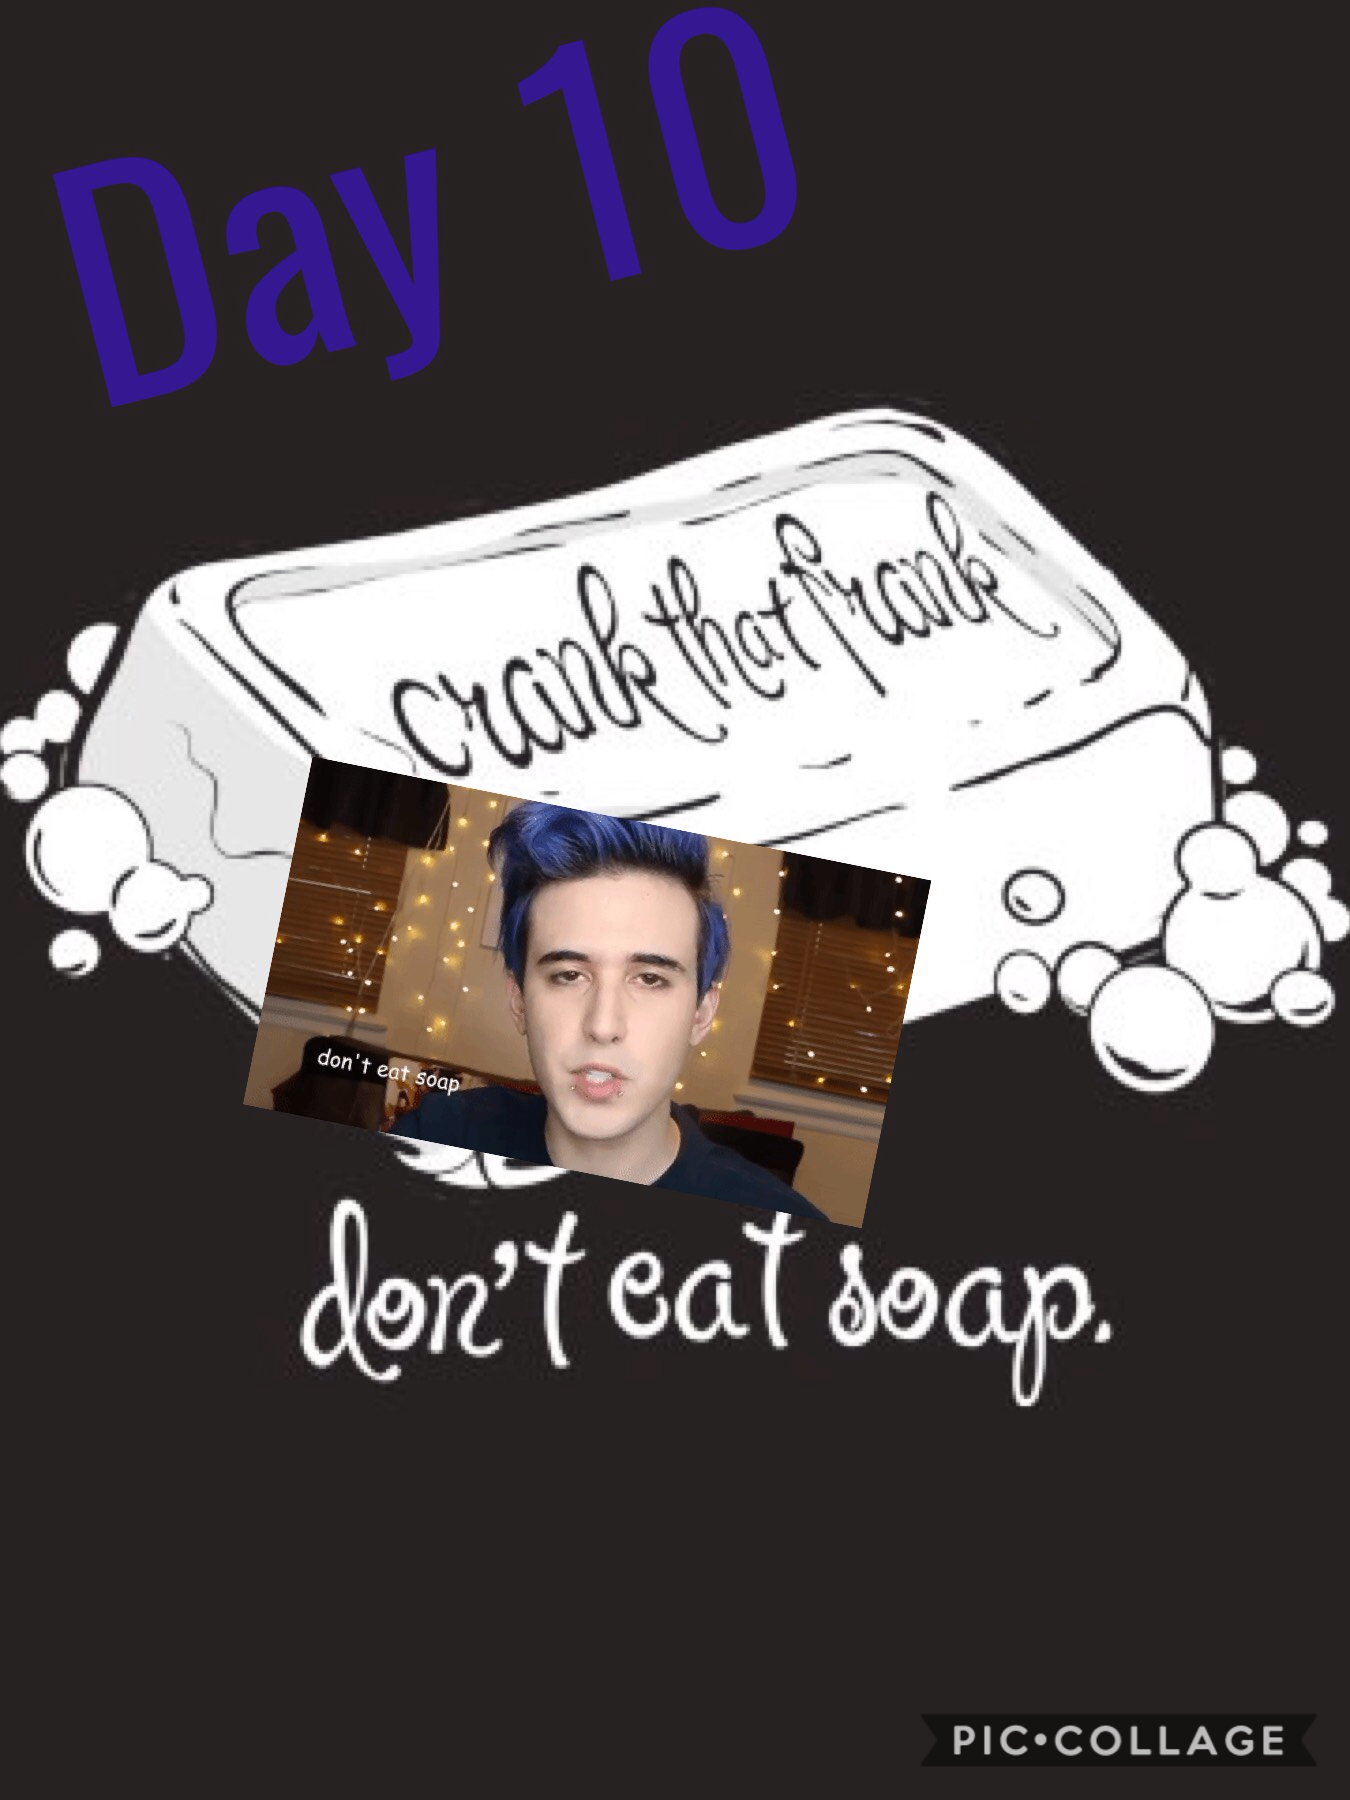 Day 10 5/14/19 



DONT EAT SOAP!!!!!!




STOP EATING SOAP OR YOU WILL BE RANDOMLY G NOTED WATCH UR BACK YOU EMO MUSICCALLYS AND FURREEEEEES!!!!!!! "Tumblr don't come after me I love furries  can't you tell by my face!?"-CRANKTHATFRANK 